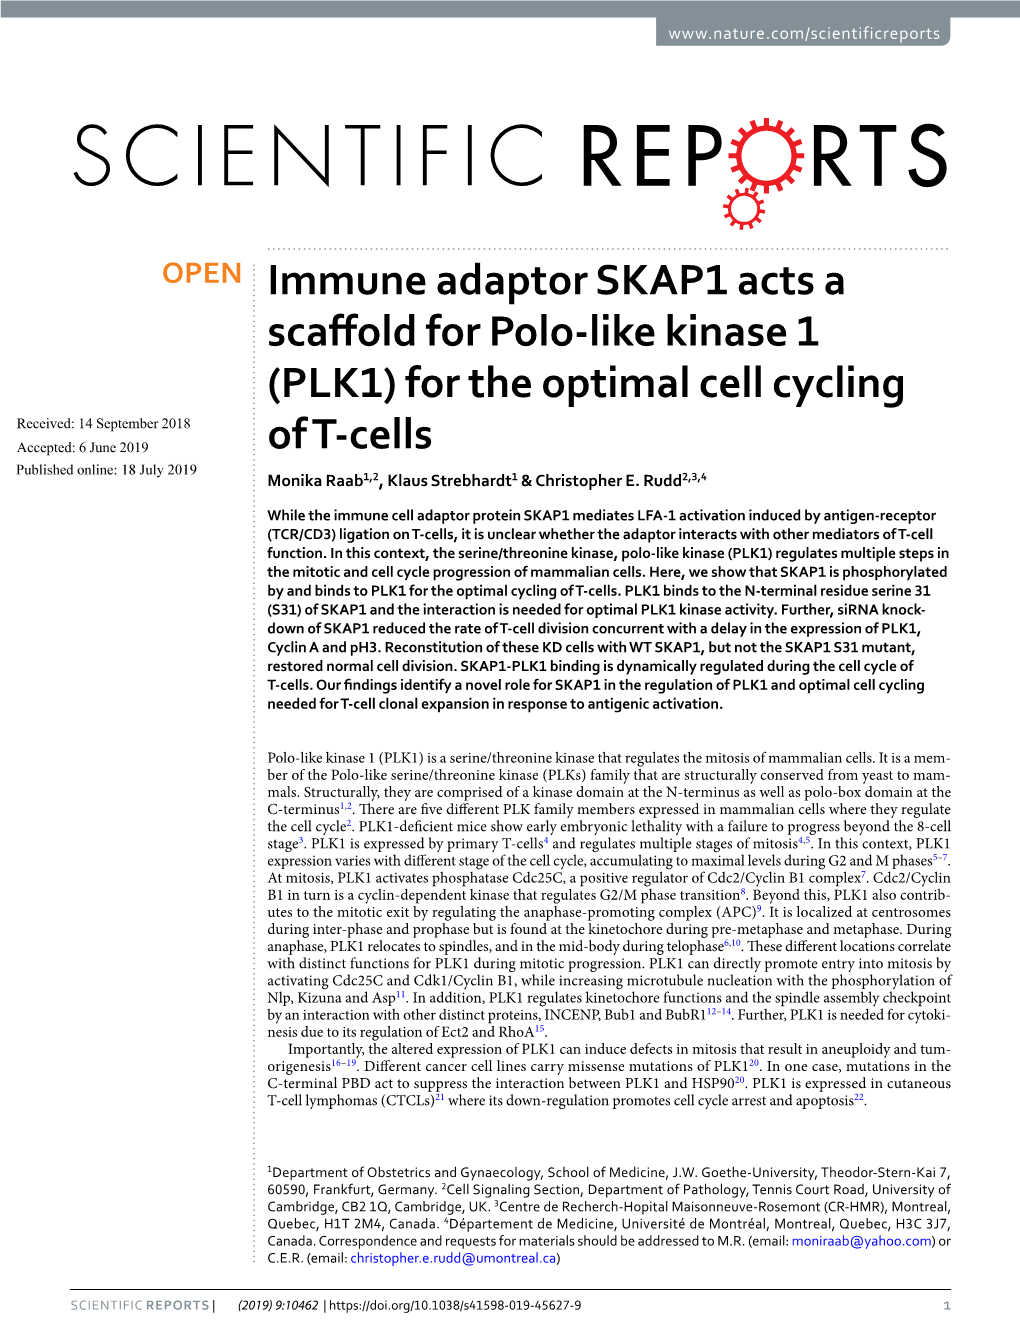 Immune Adaptor SKAP1 Acts a Scaffold for Polo-Like Kinase 1 (PLK1)